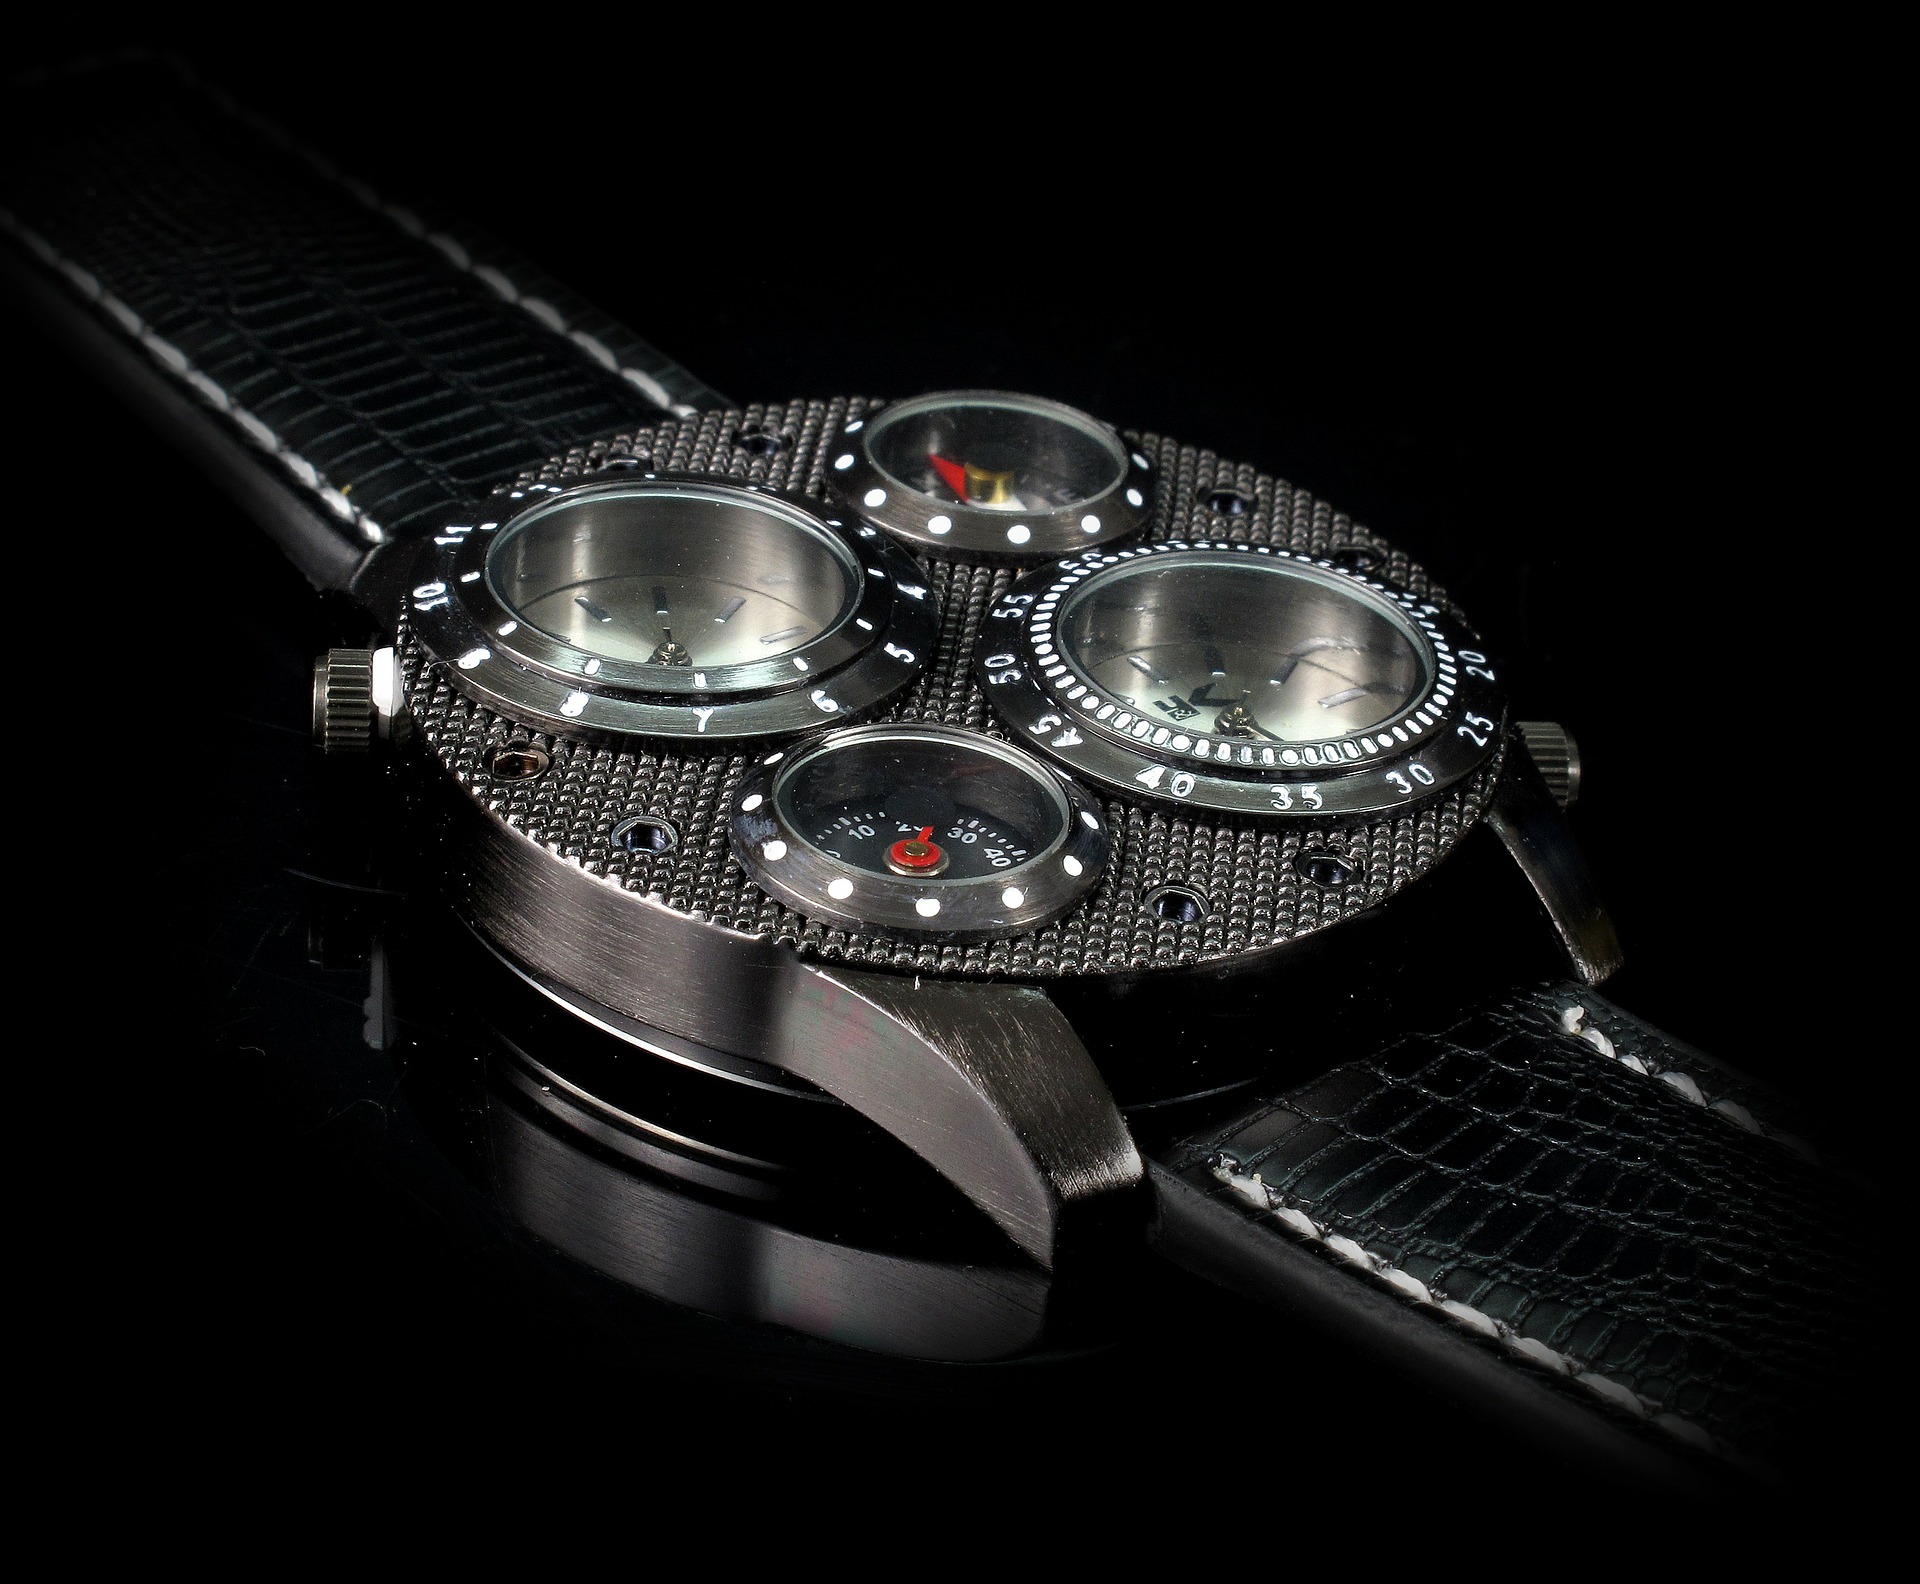 An alternative OMEGA seamster on a black background